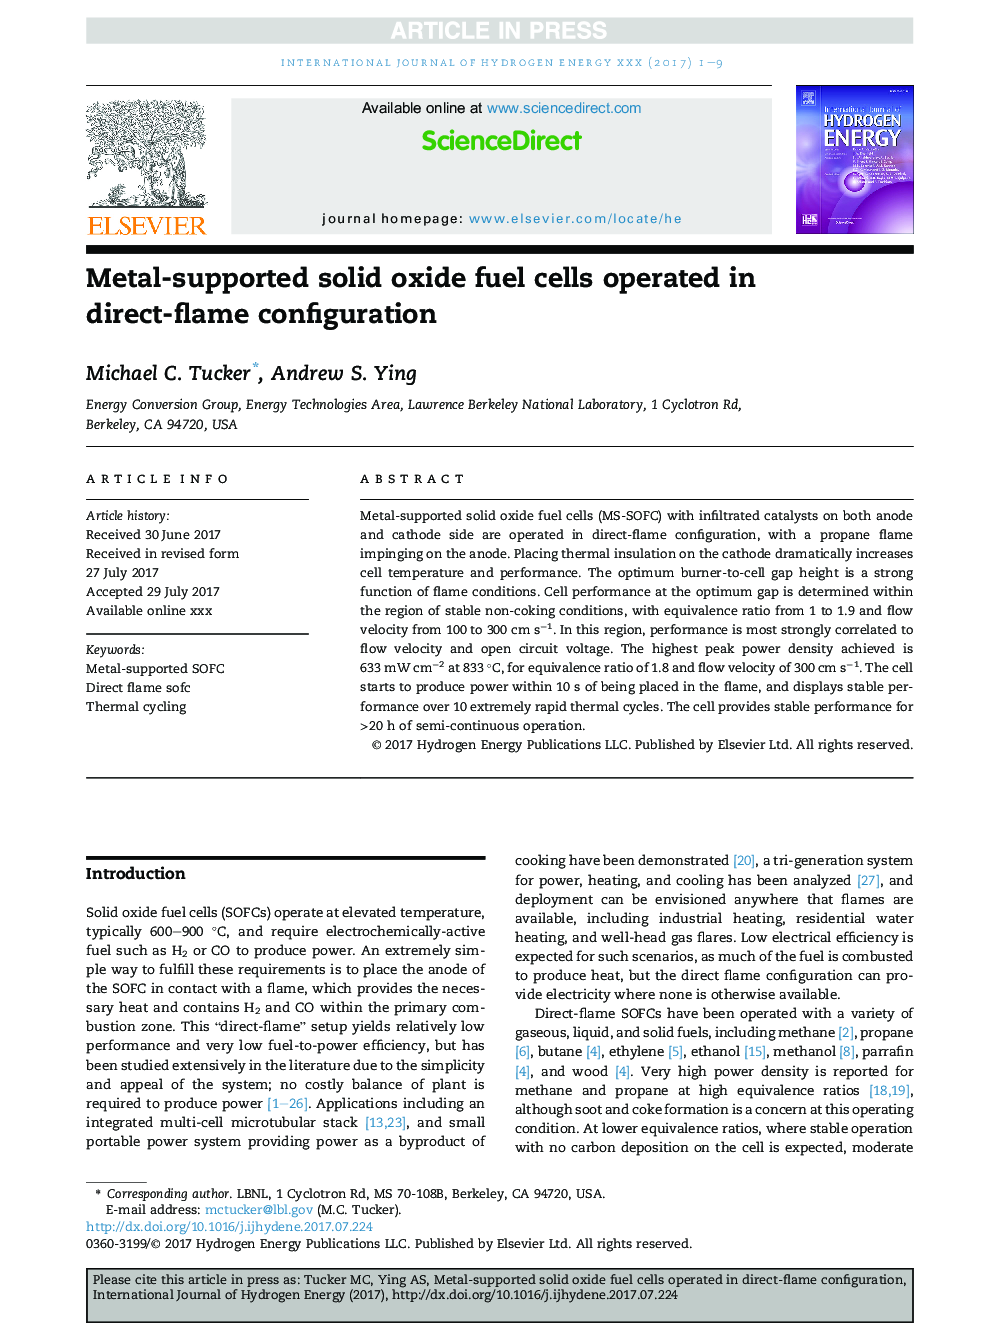 Metal-supported solid oxide fuel cells operated in direct-flame configuration